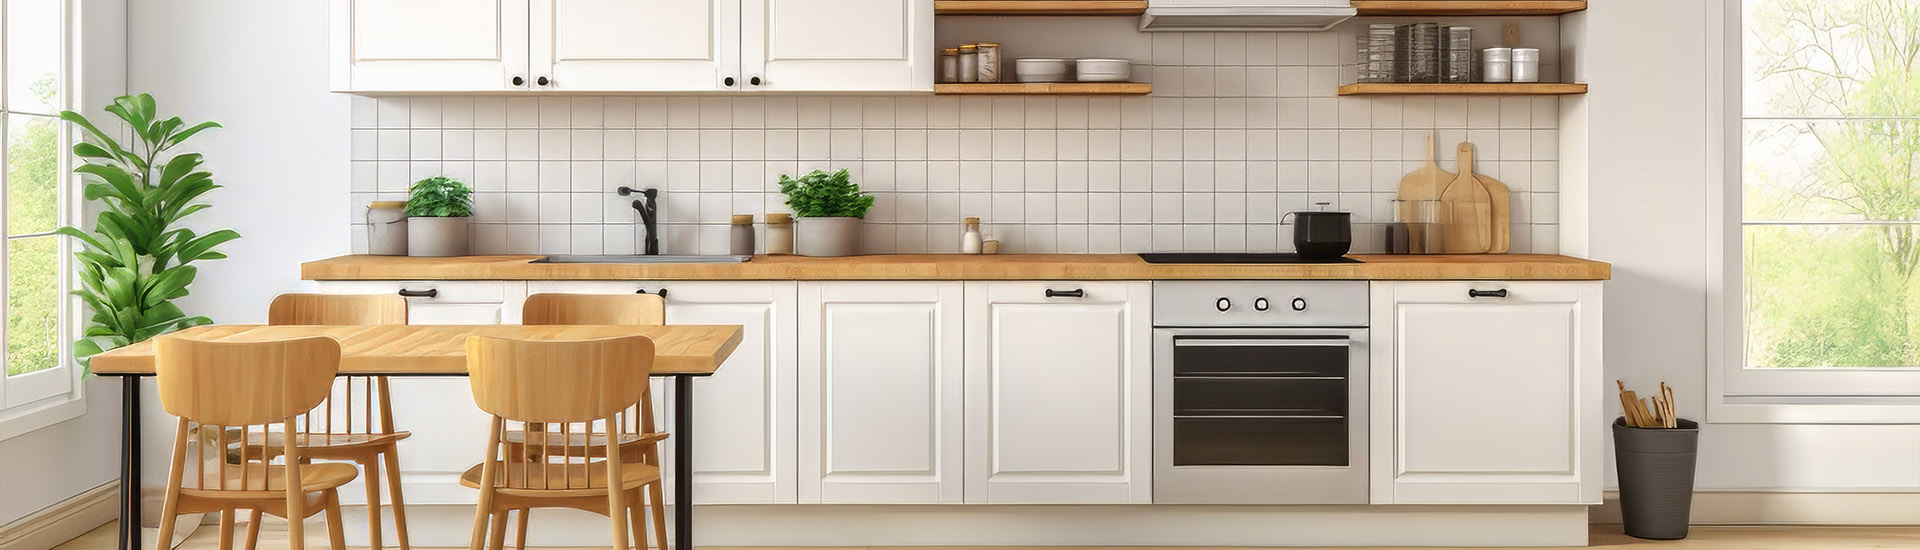 Practical Considerations for Your Next Kitchen Renovation